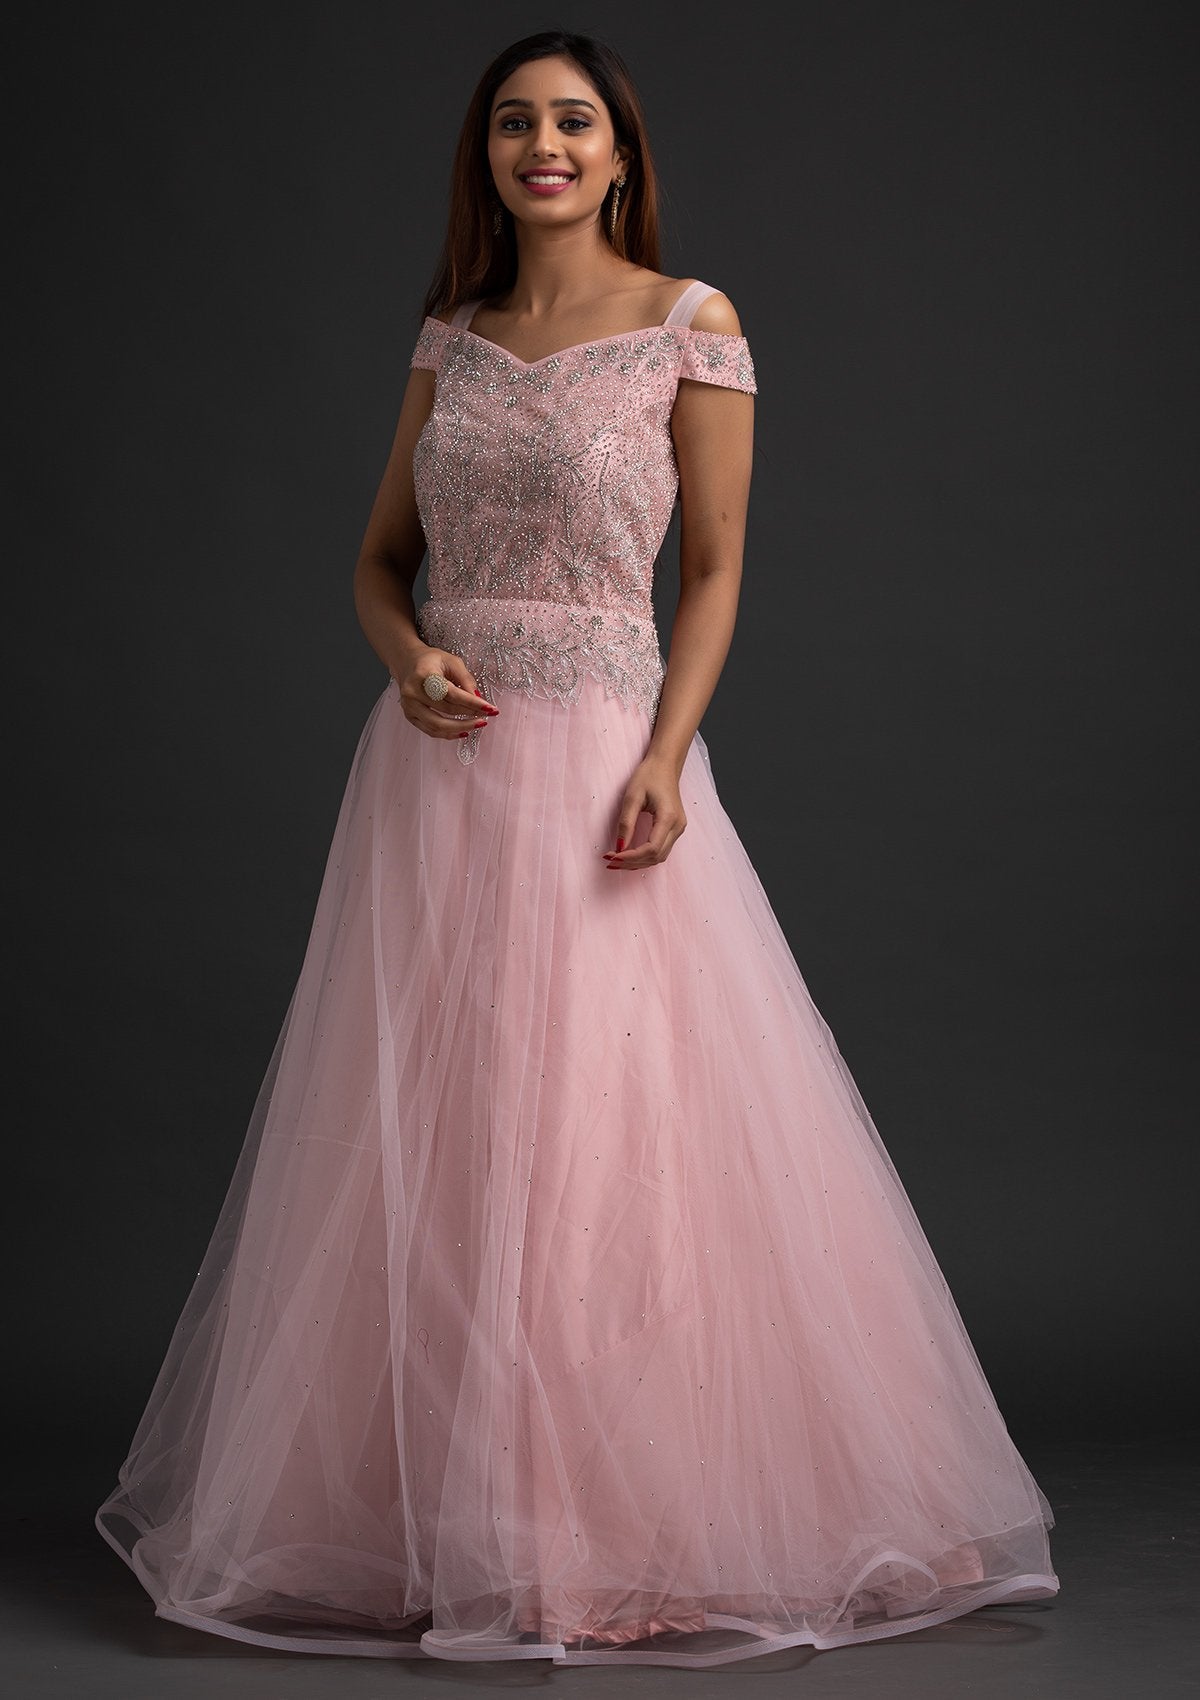 Fluffy Pink Dress Ball Gowns | Tulle Ball Gown Straps | Pink Dress Ball Gown  Tulle - Evening Dresses - Aliexpress